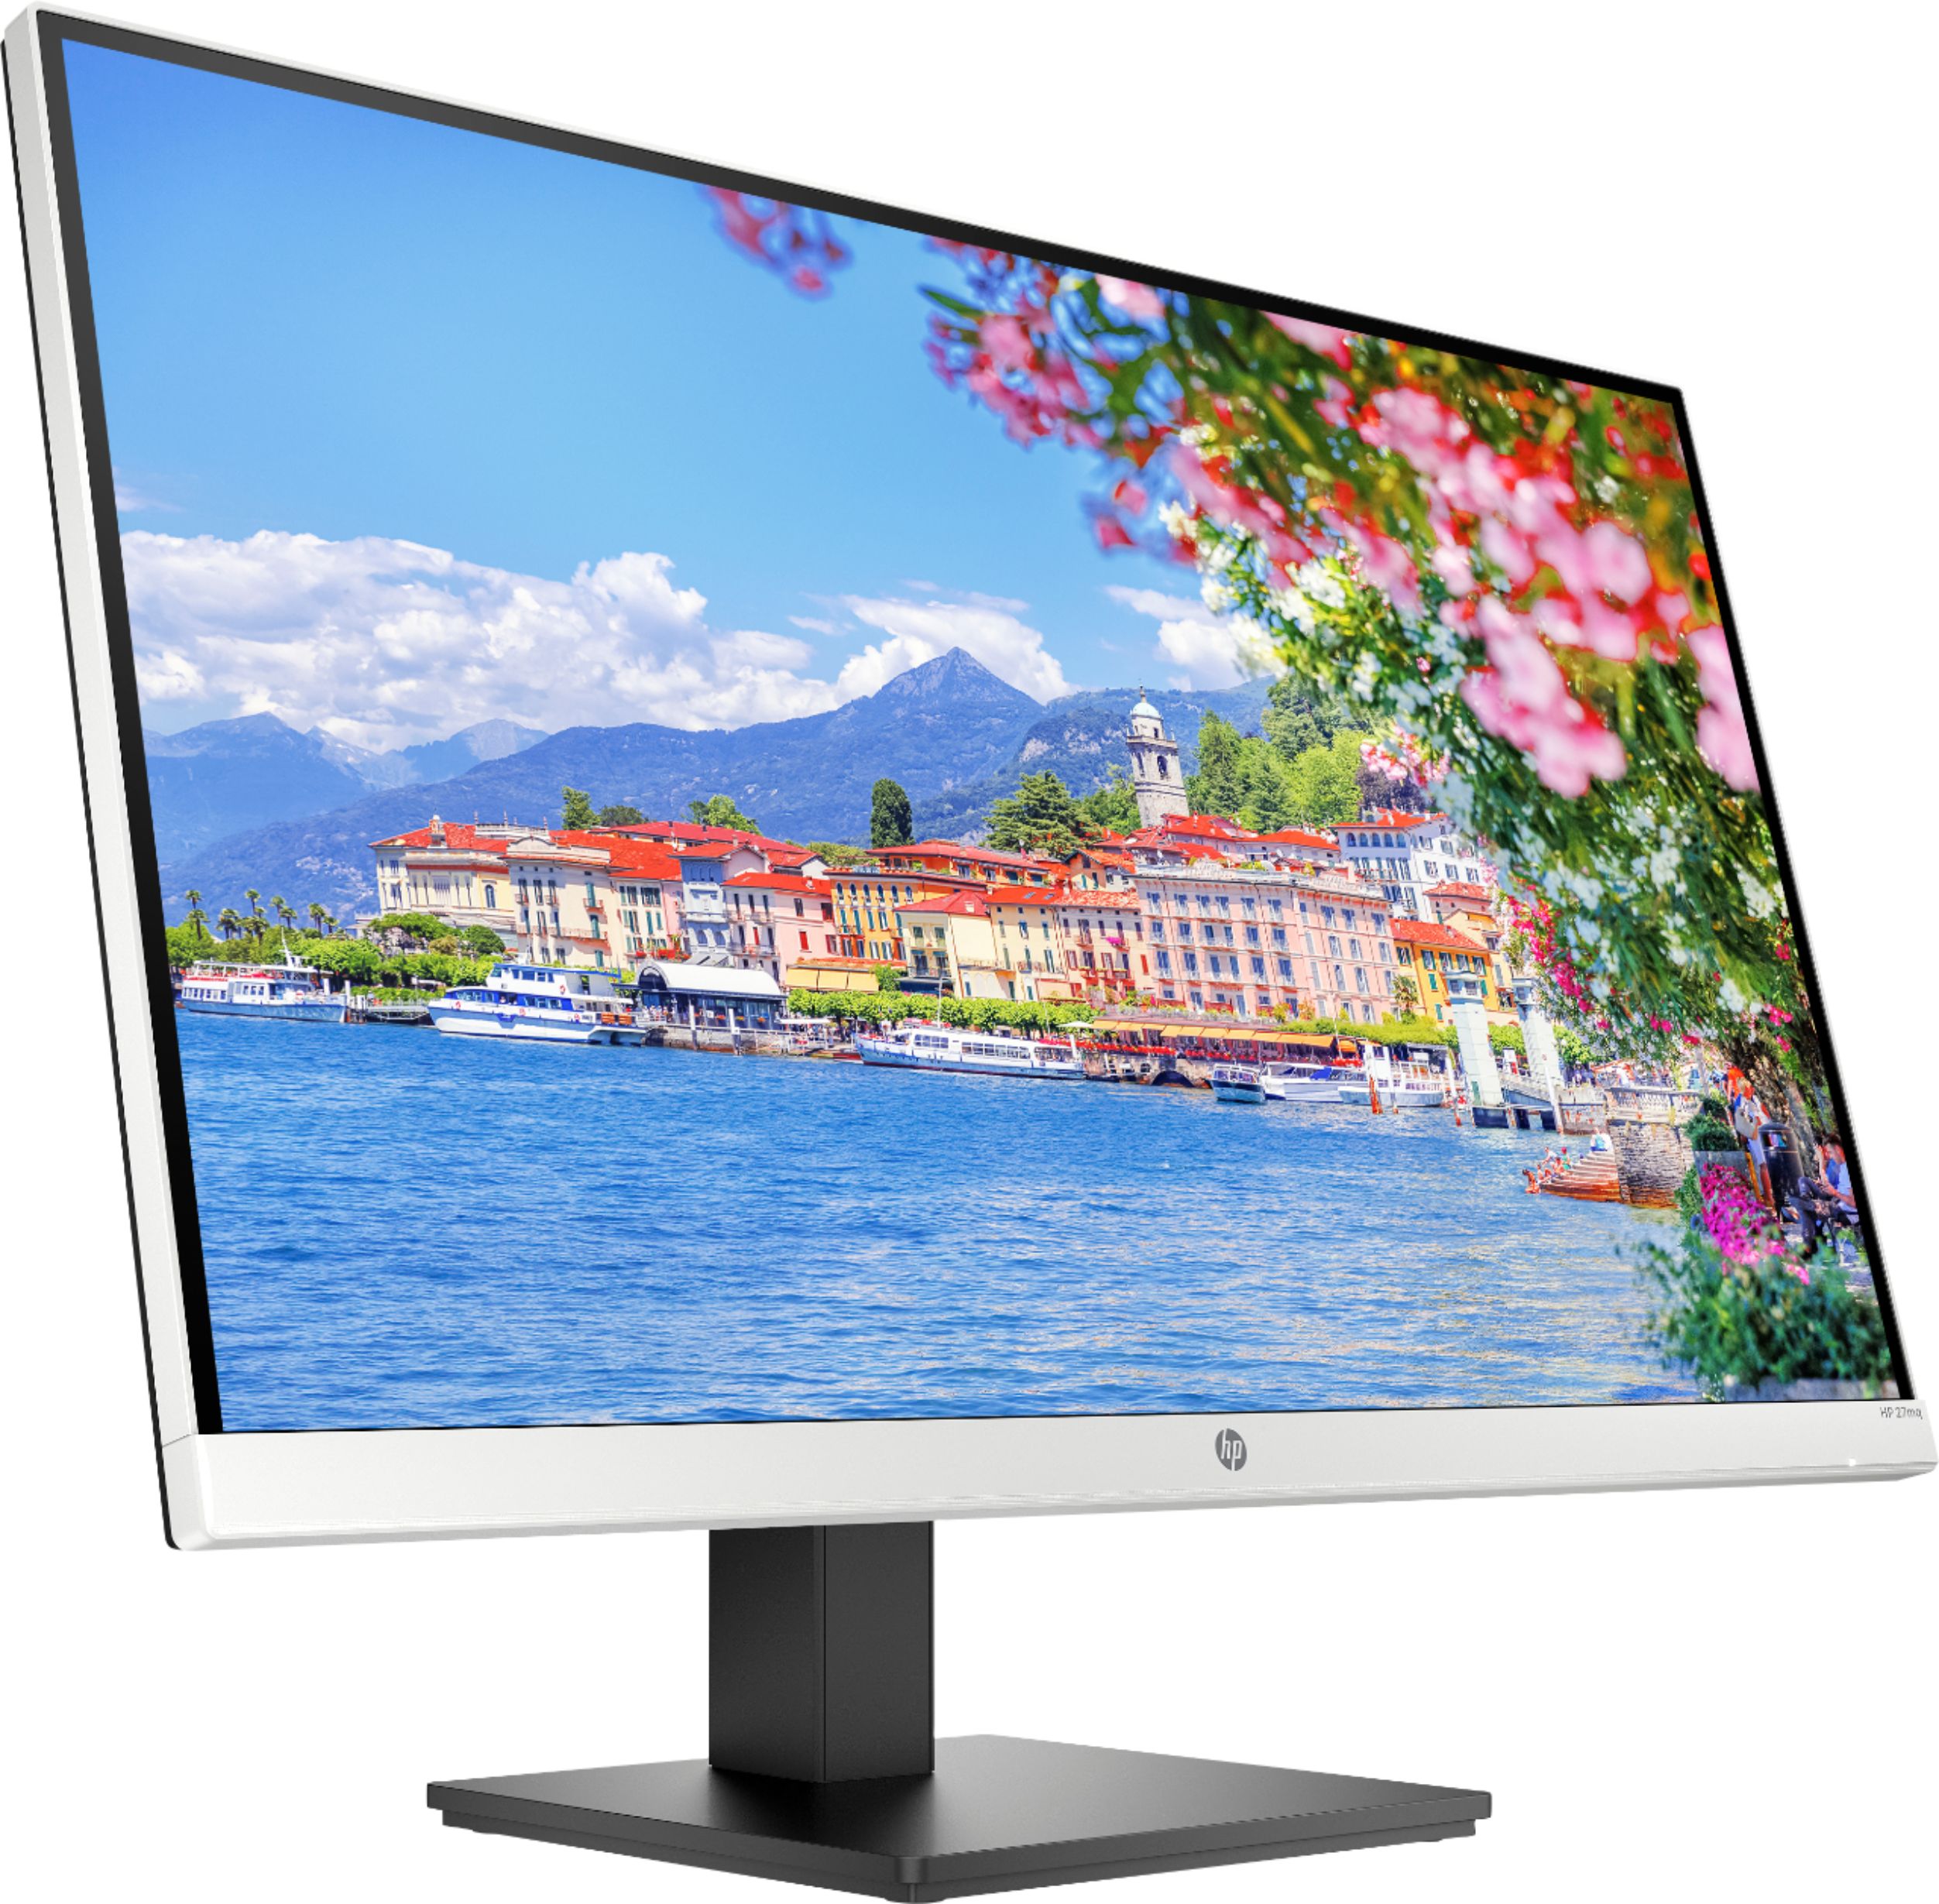 HP 27 IPS LED FHD FreeSync Monitor with Adjustable Height (HDMI, VGA)  Silver & Black M27h - Best Buy